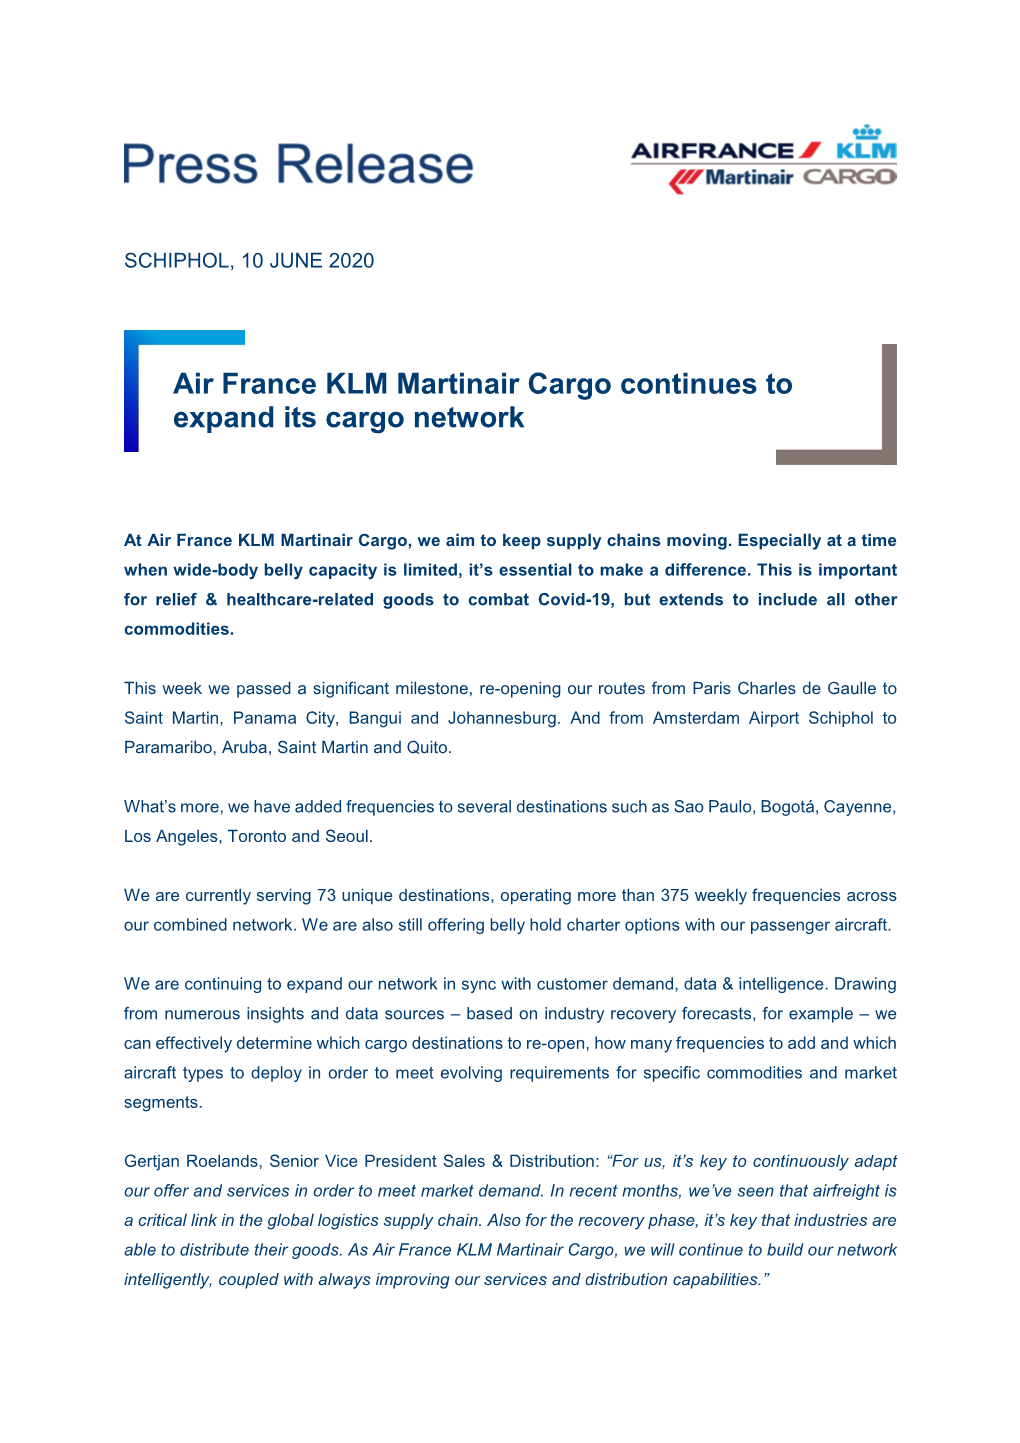 Air France KLM Martinair Cargo Continues to Expand Its Cargo Network